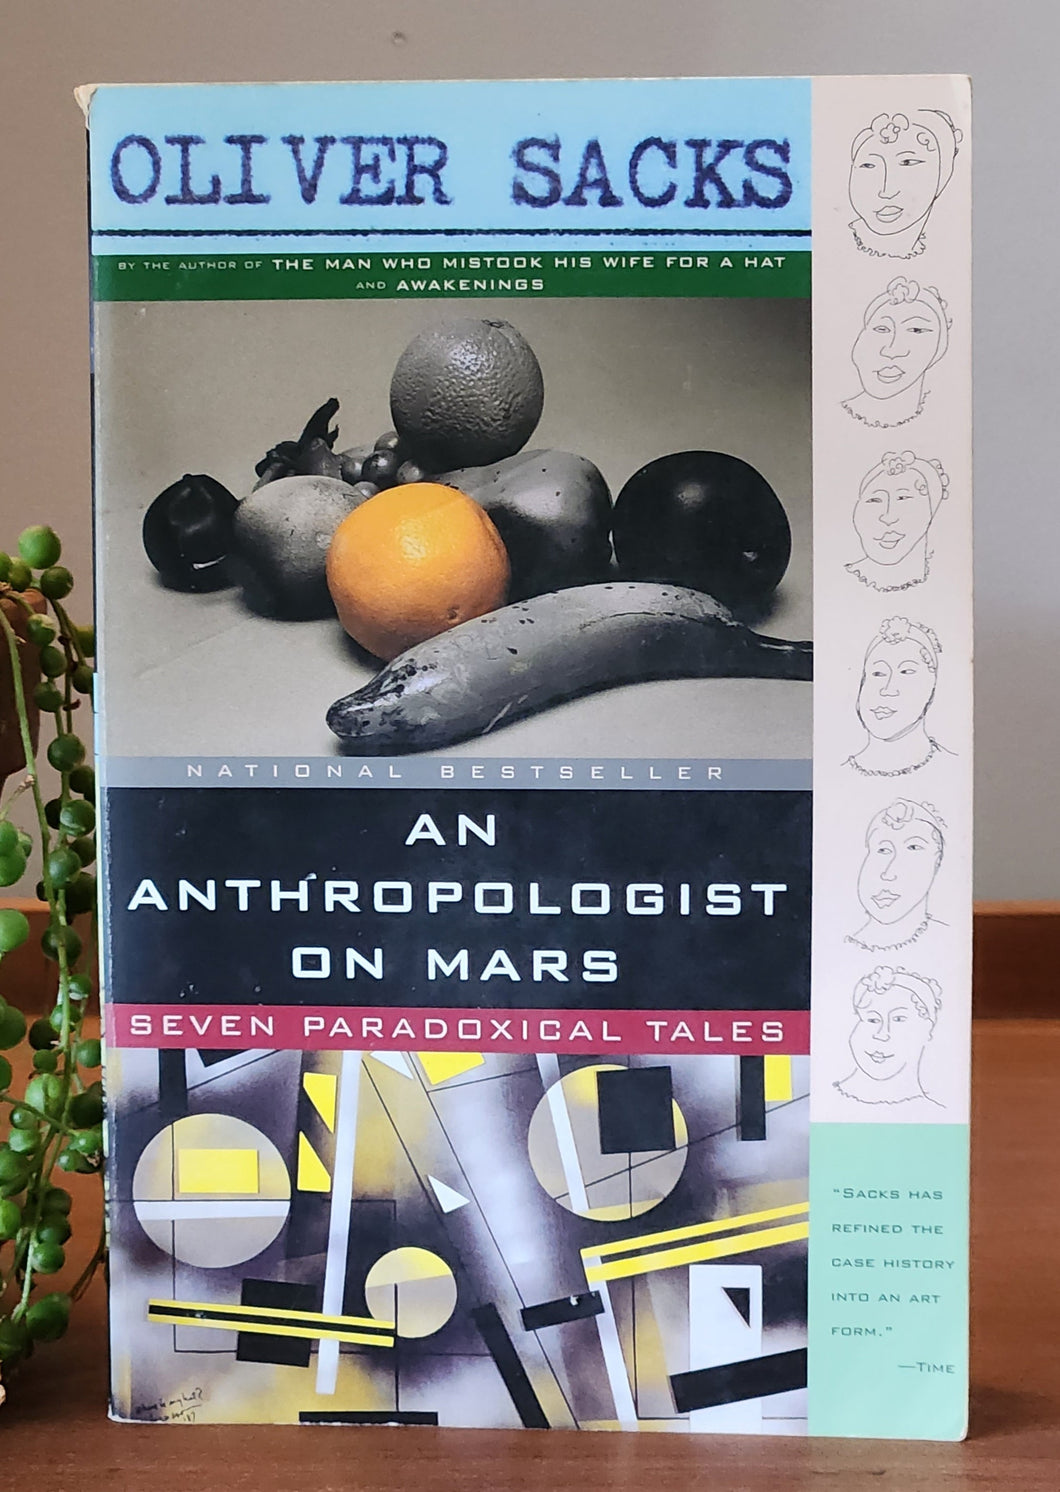 An Anthropologist On Mars: Seven Paradoxical Tales by Oliver Sacks